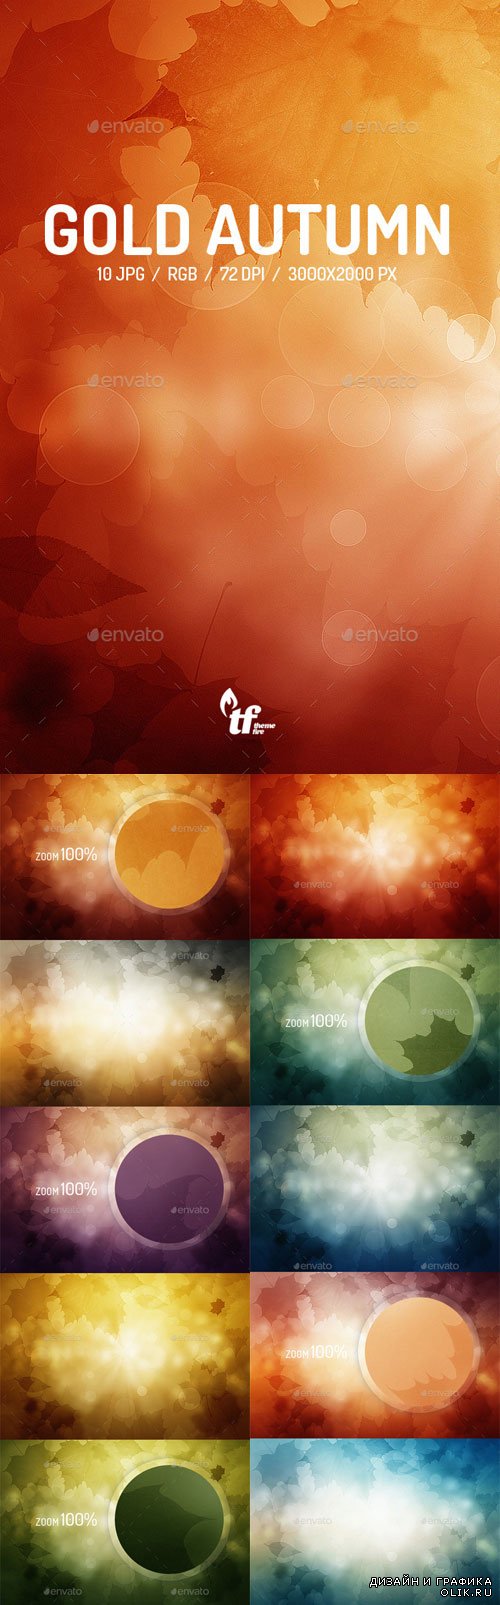 Gold Autumn Backgrounds